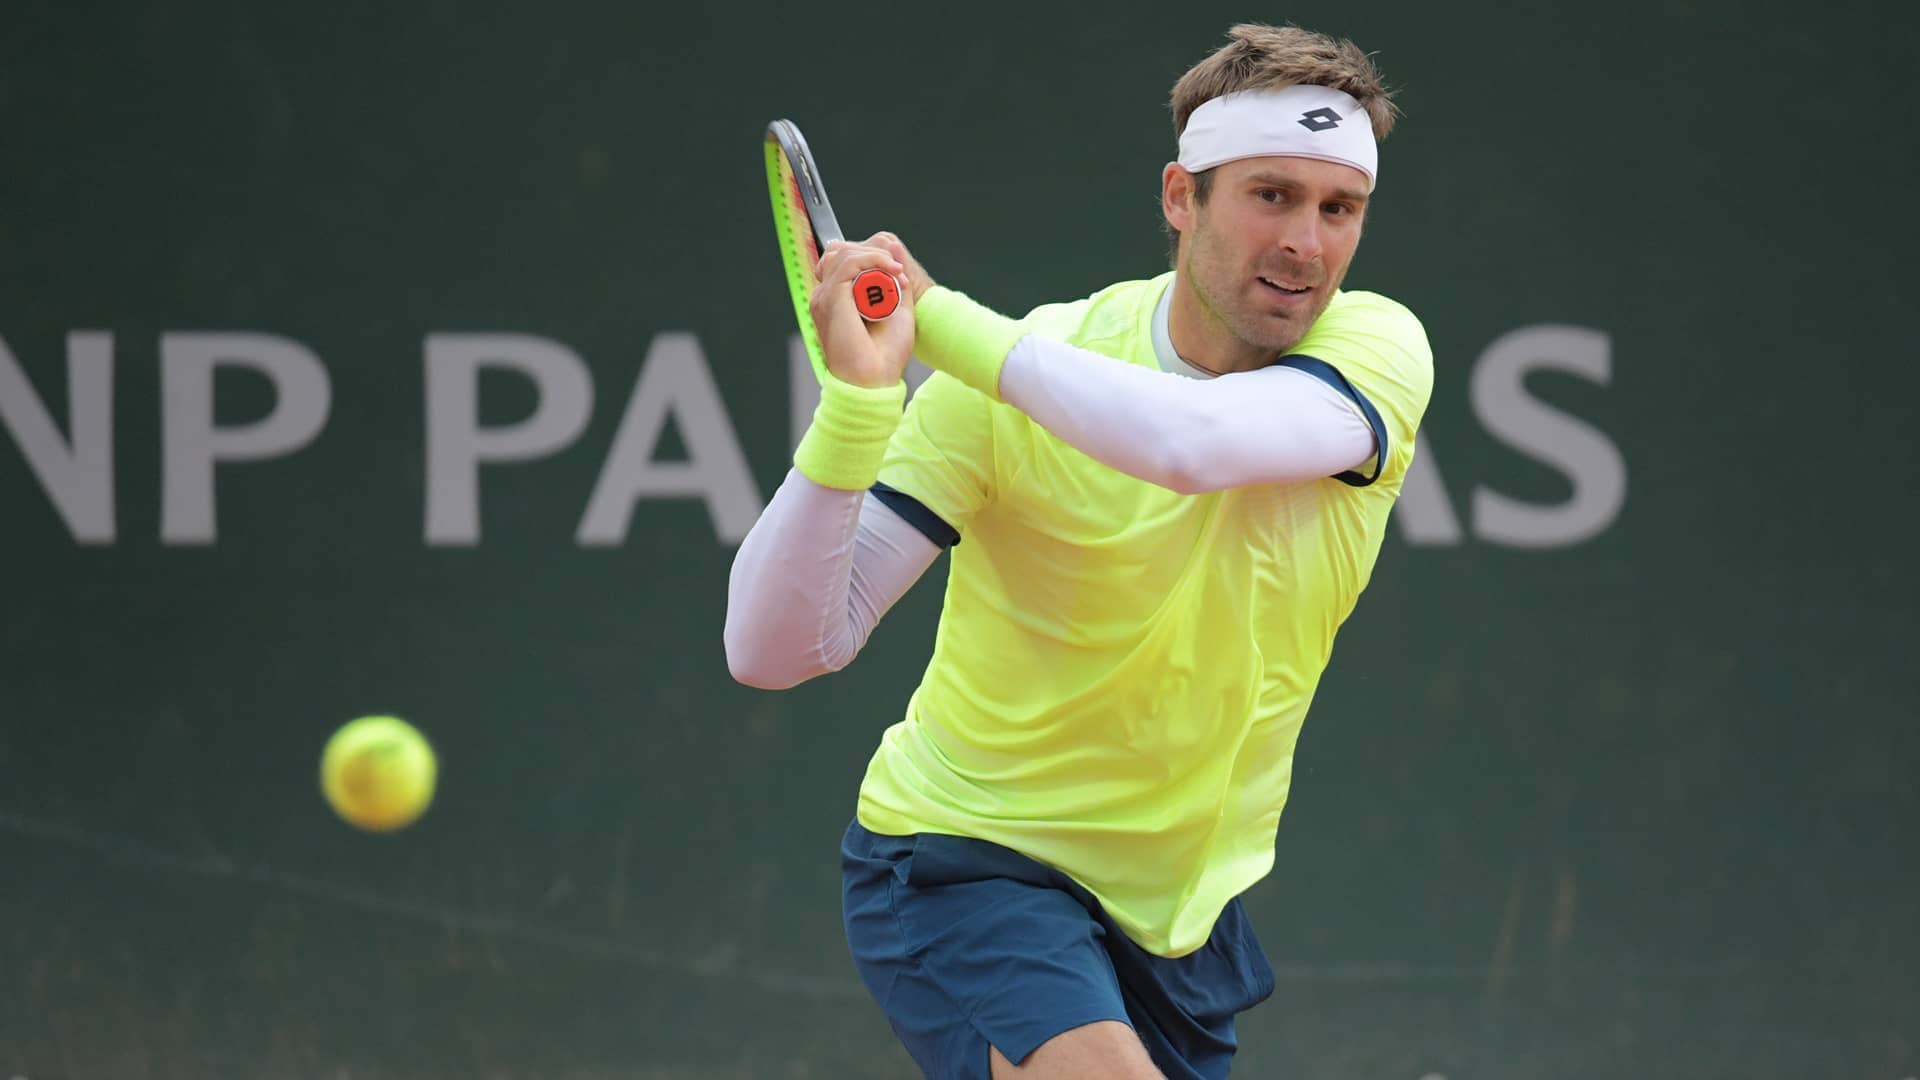 Norbert Gombos reaches the third round of a Grand Slam for the first time, at Roland Garros.